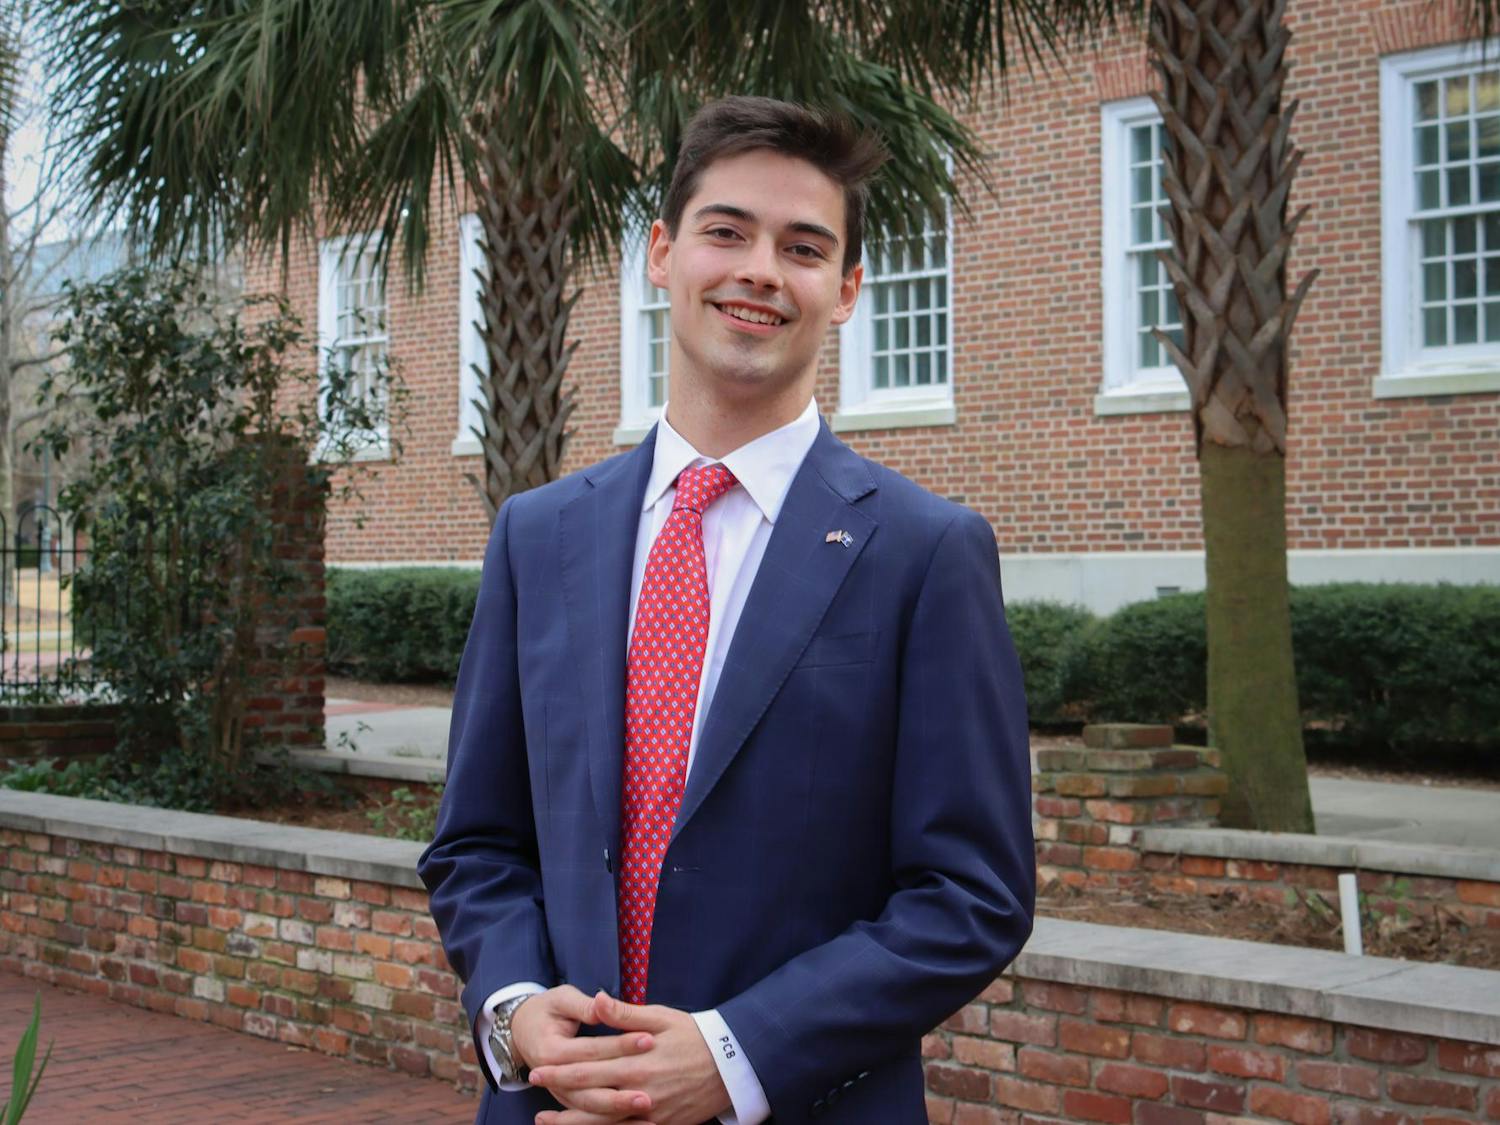 Student Body President candidate Patton Byars stands outside of USC's School of Journalism and Mass Communications for a posed photo on Feb. 9, 2024. Byars is running on a ballot with current student body member Courtney Tkacs for president and vice president, respectively.